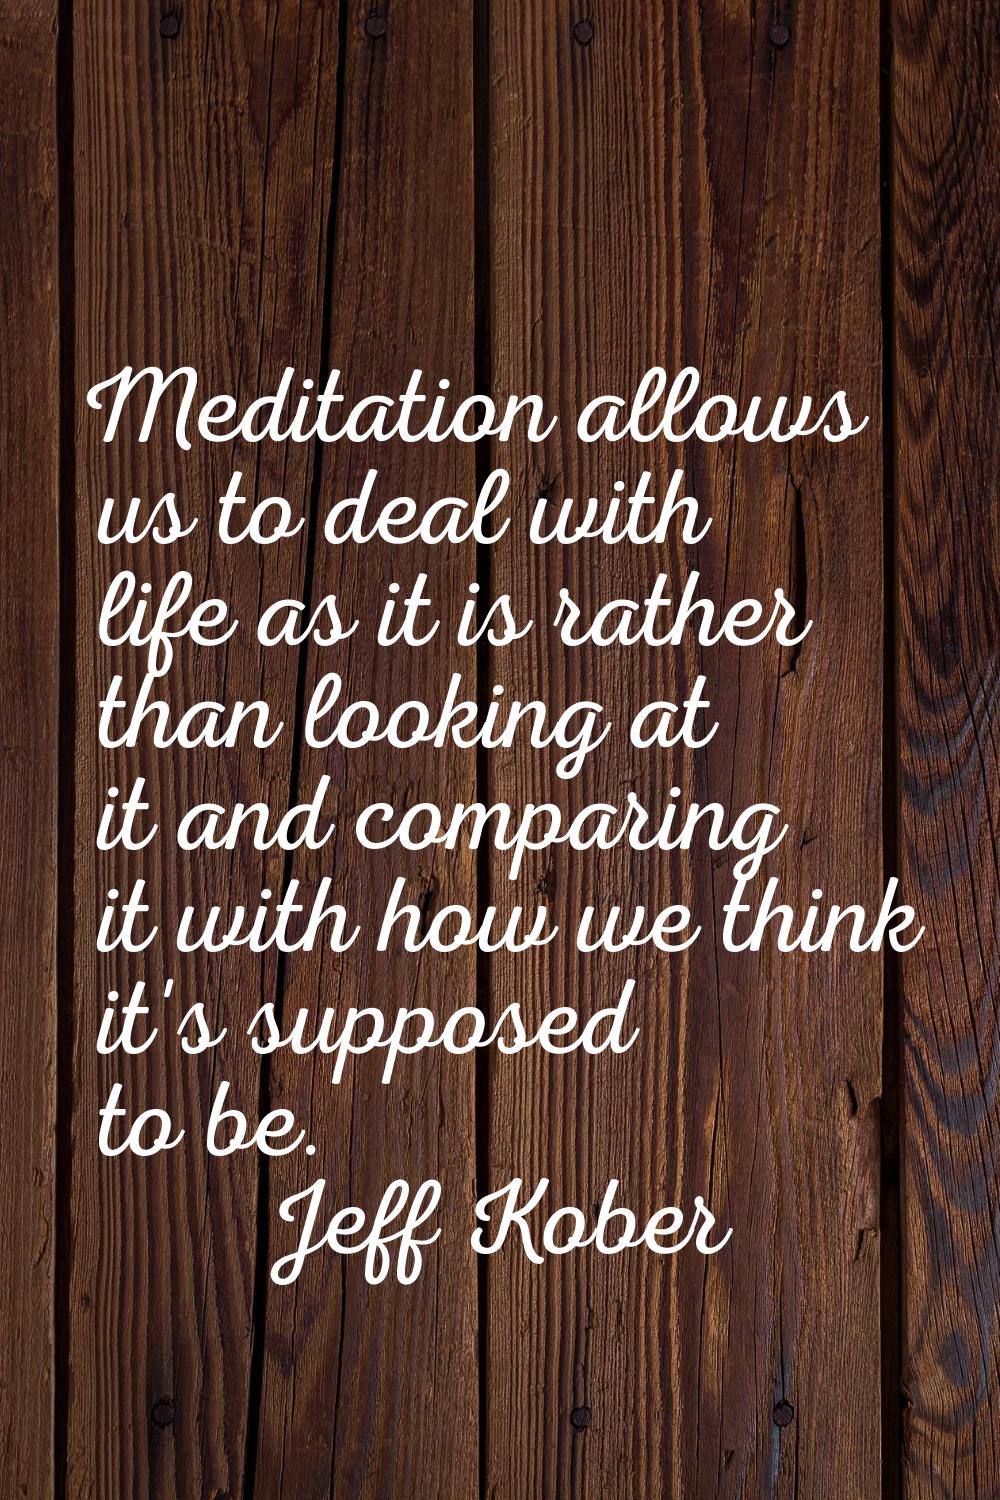 Meditation allows us to deal with life as it is rather than looking at it and comparing it with how